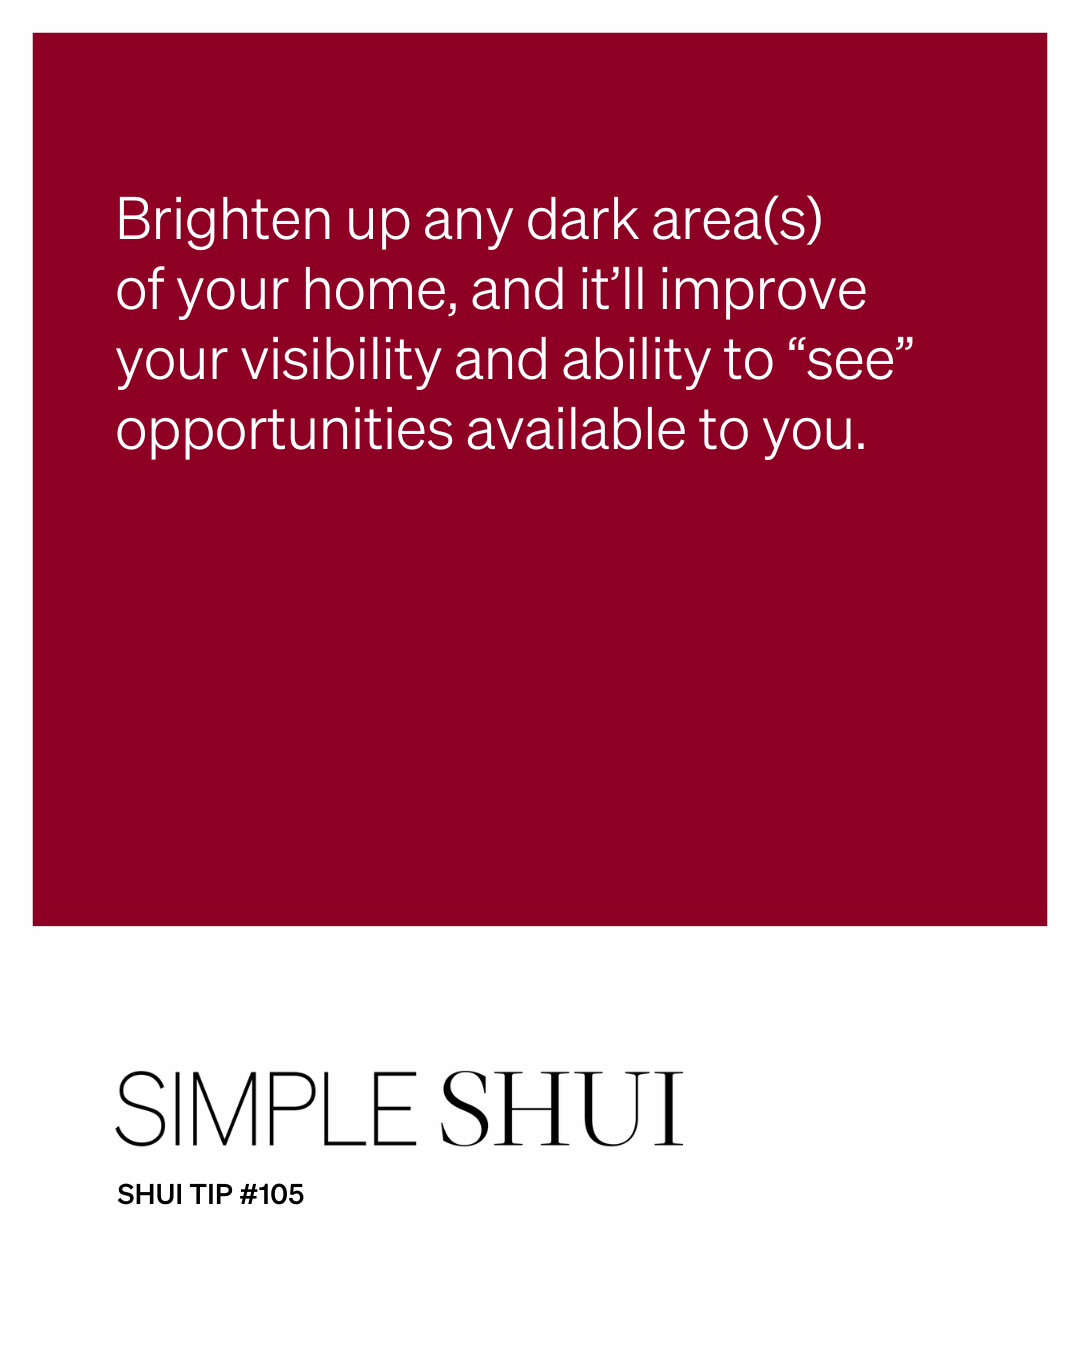 simple shui tip: get out of the dark